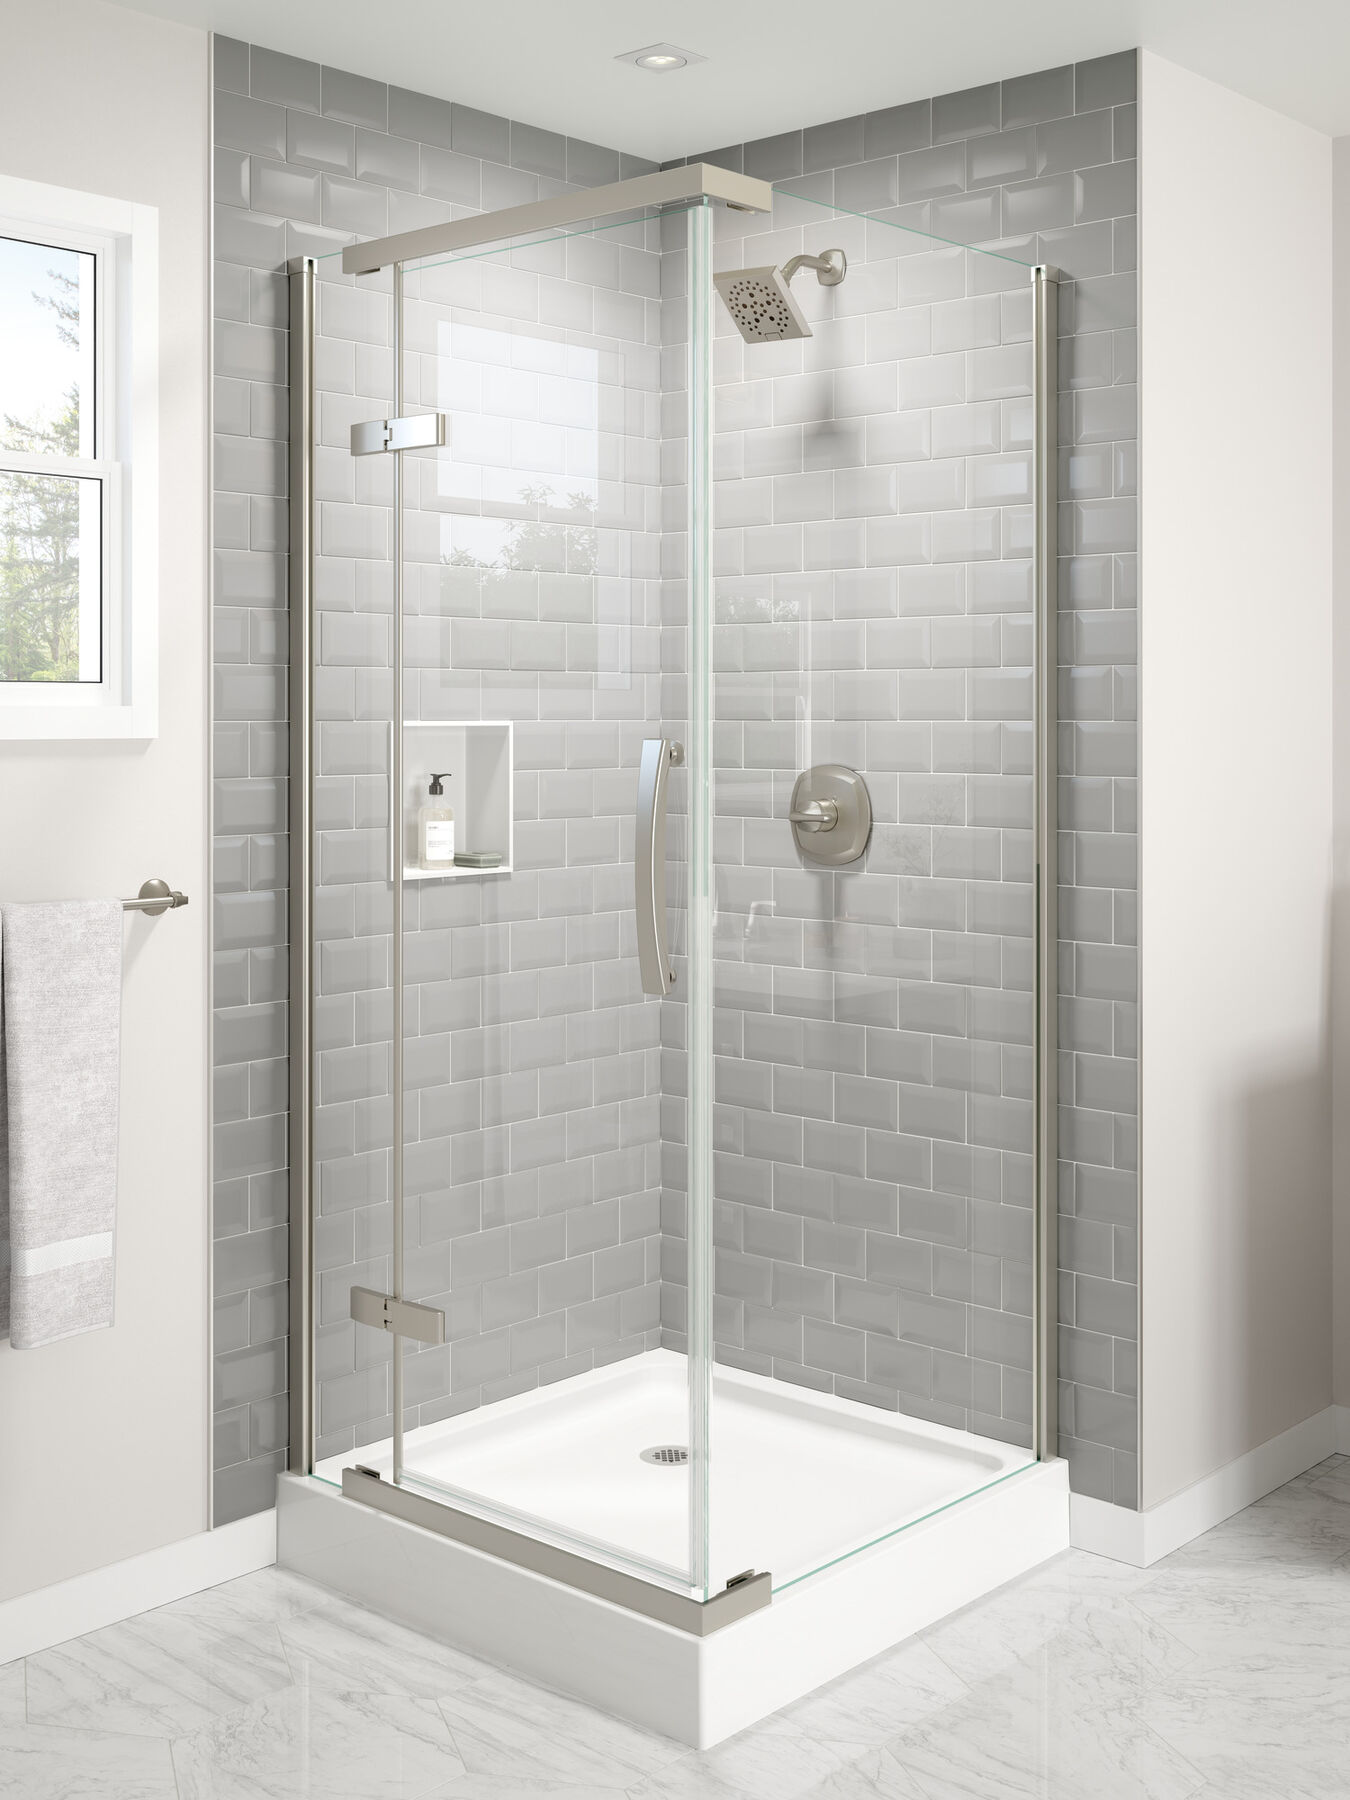 Frameless shower door with glass enclosure and towel hooks. Available to  any size at Delta Gl…